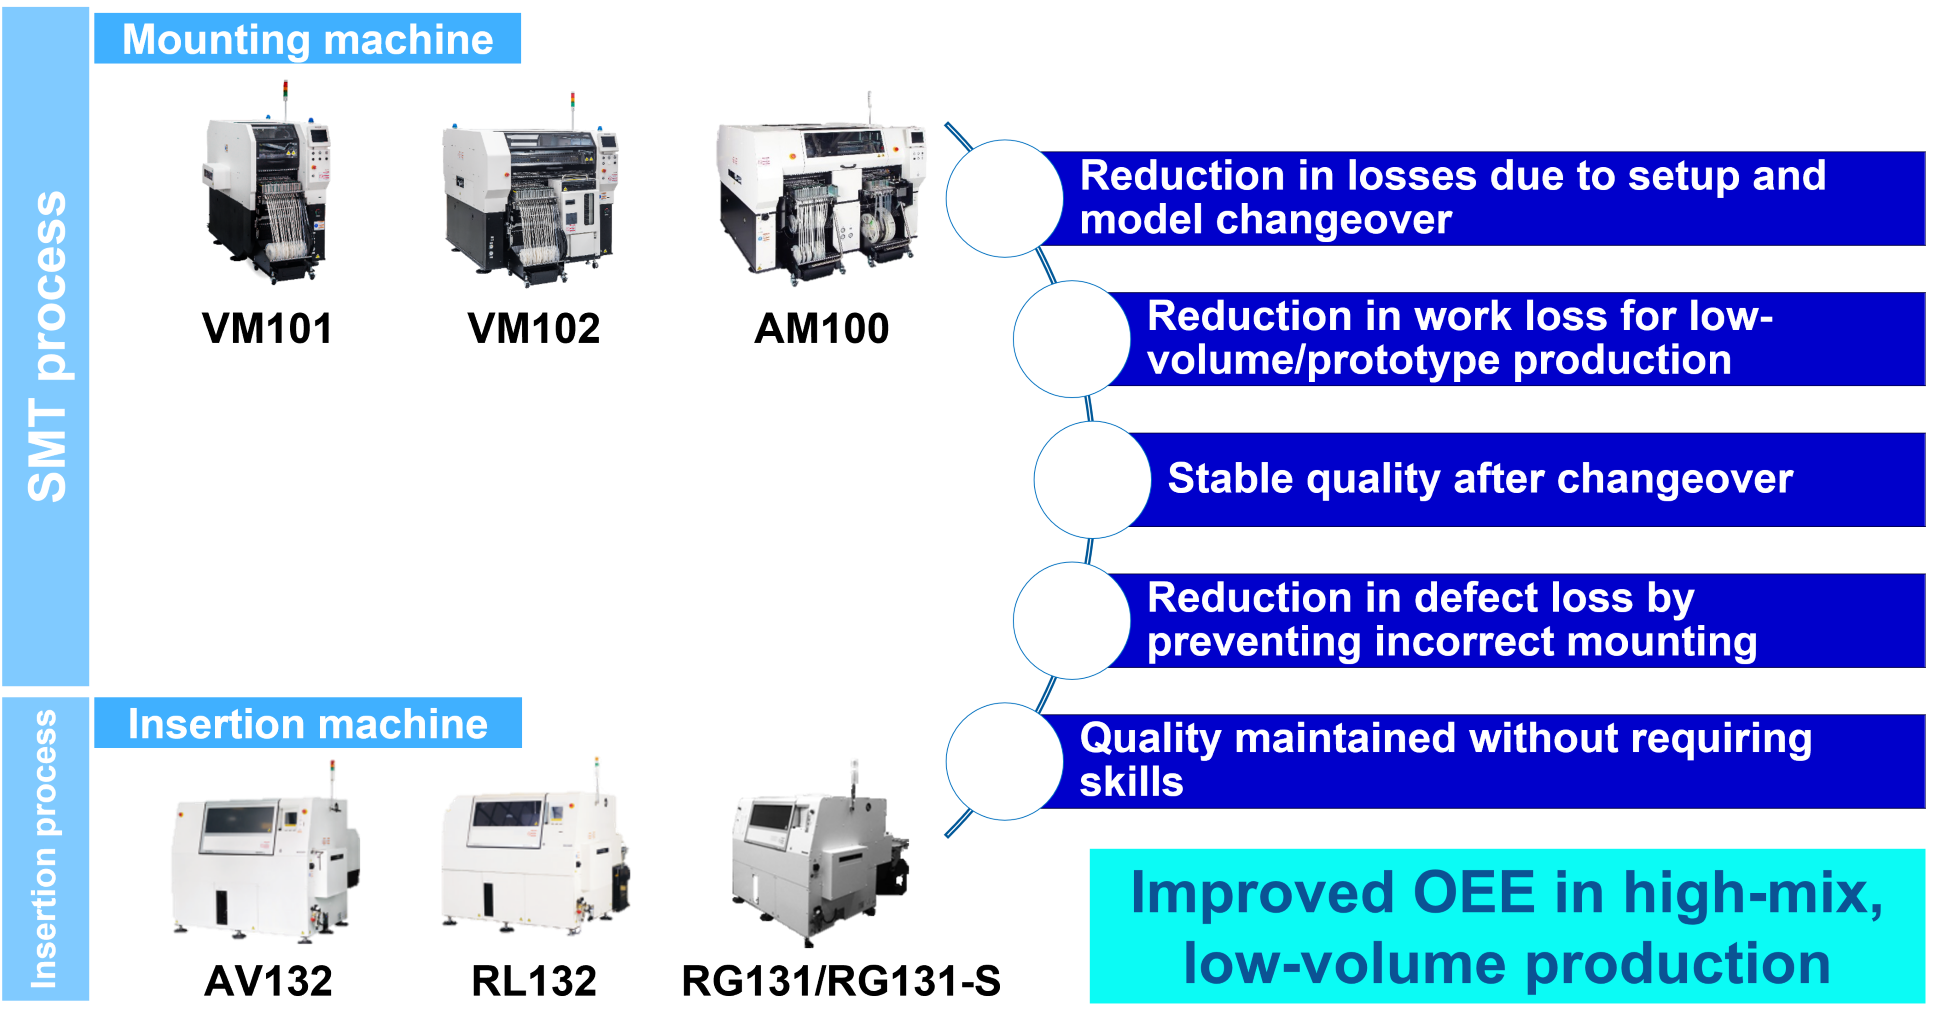 Improved OEE in high-mix, low-volume production